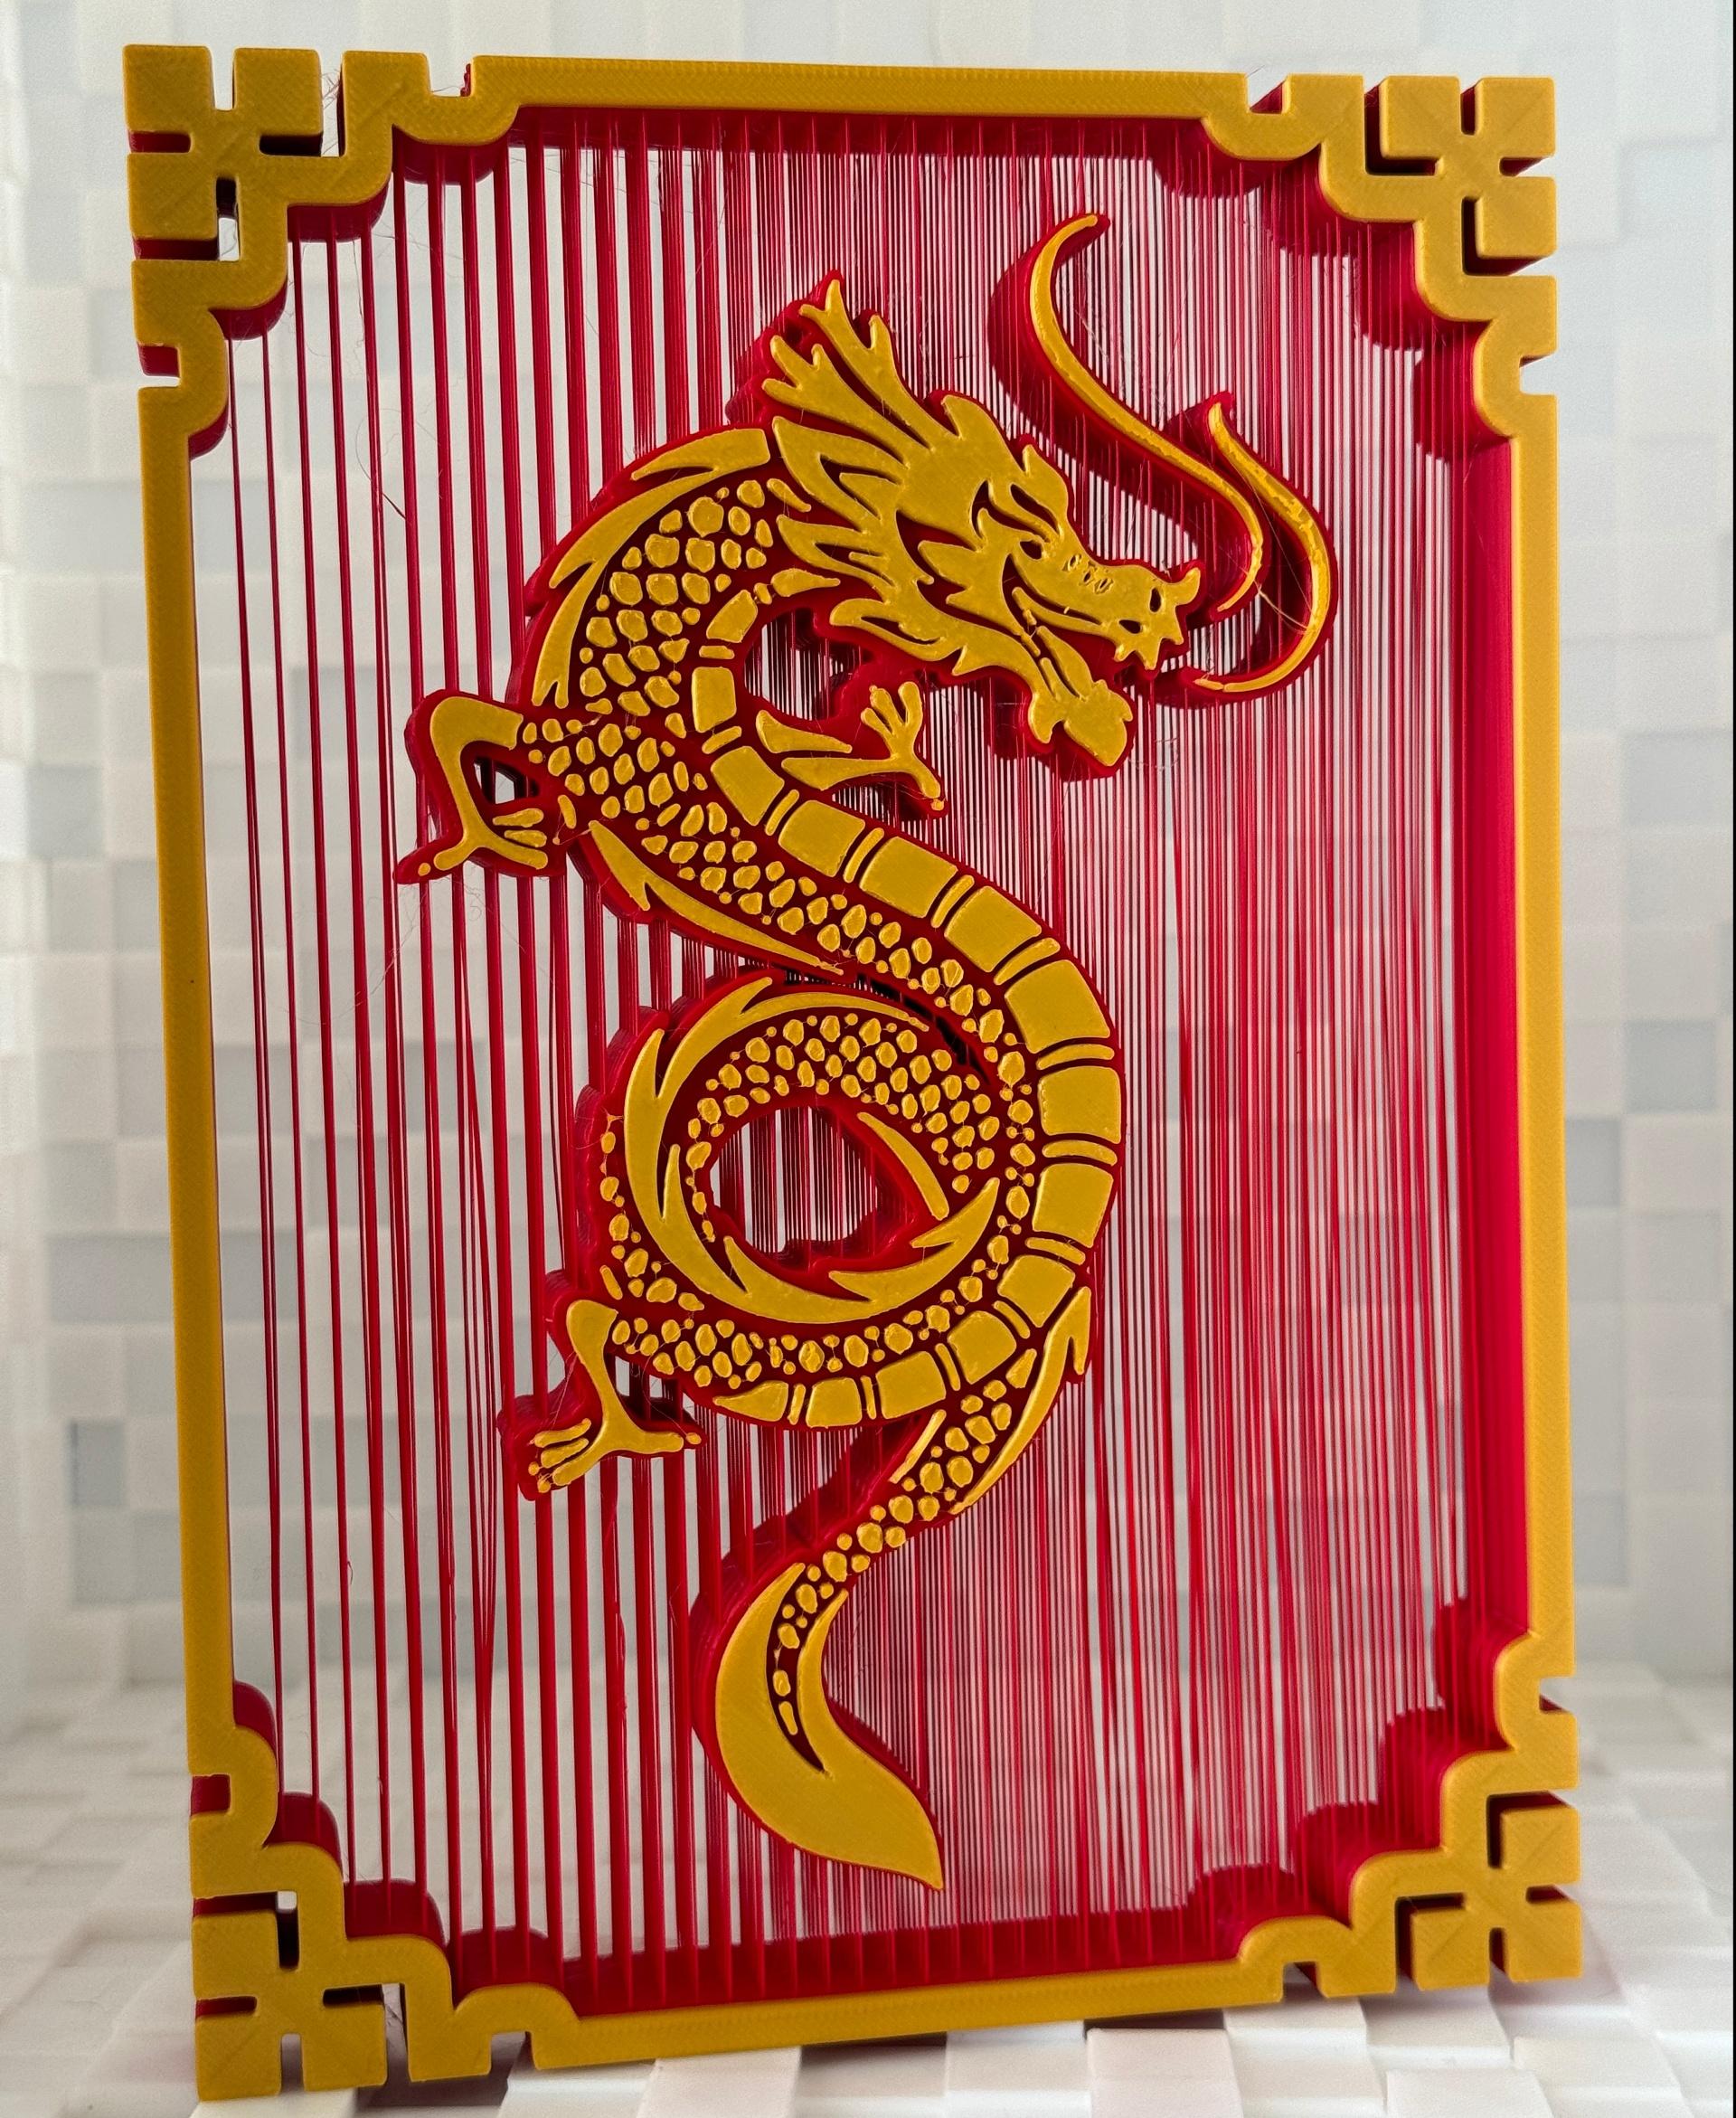 Dragon Suspended String Art - I really love these Suspended String Art models. It always amazes me to see a printer's ability to bridge like this! I printed this one in Polymaker Polylite Wine Red and Gold SIlk PLA; beautiful and amazing.
Thanks to 3dprintbunny for the model. - 3d model